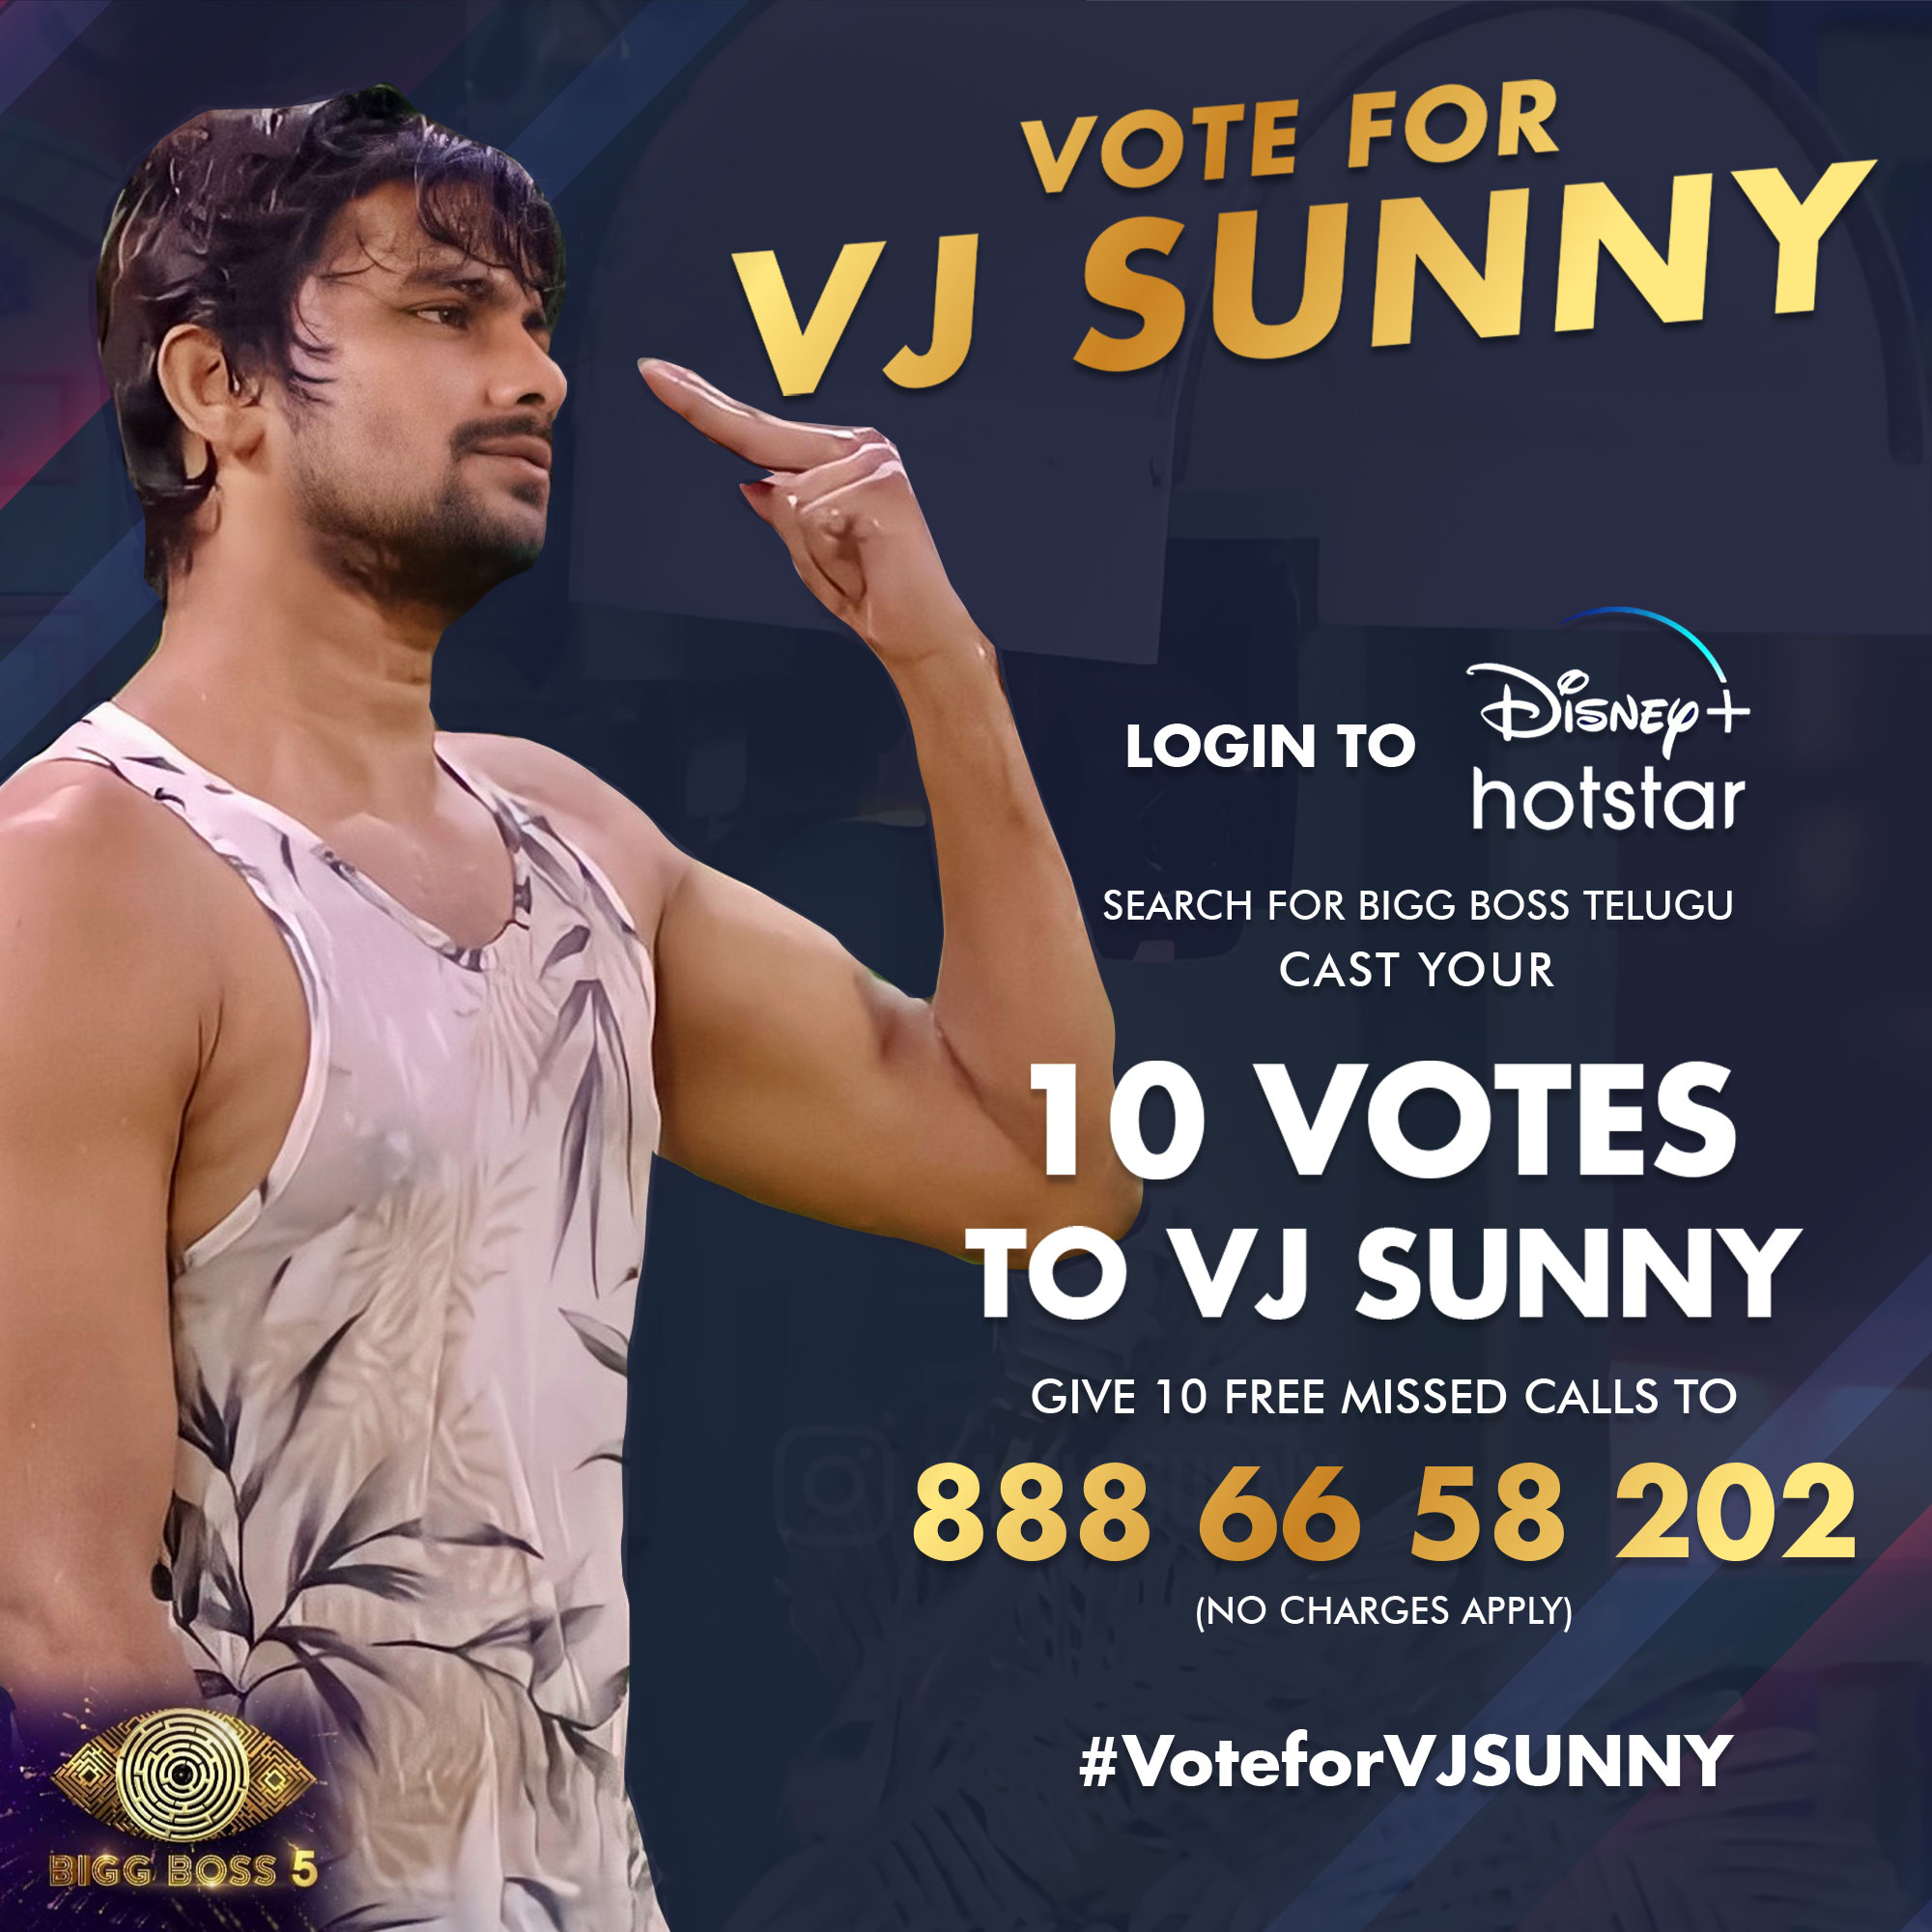 VJ Sunny on Twitter: "Please support VJ Sunny Login to Disney+Hostar APP Search for BIGG BOSS TELUGU CAST YOUR VOTE FOR Votes) GIVE 10 MISSED CALLS TO 8886658202 #iamvjsunny #vjsunny #biggboss5 #